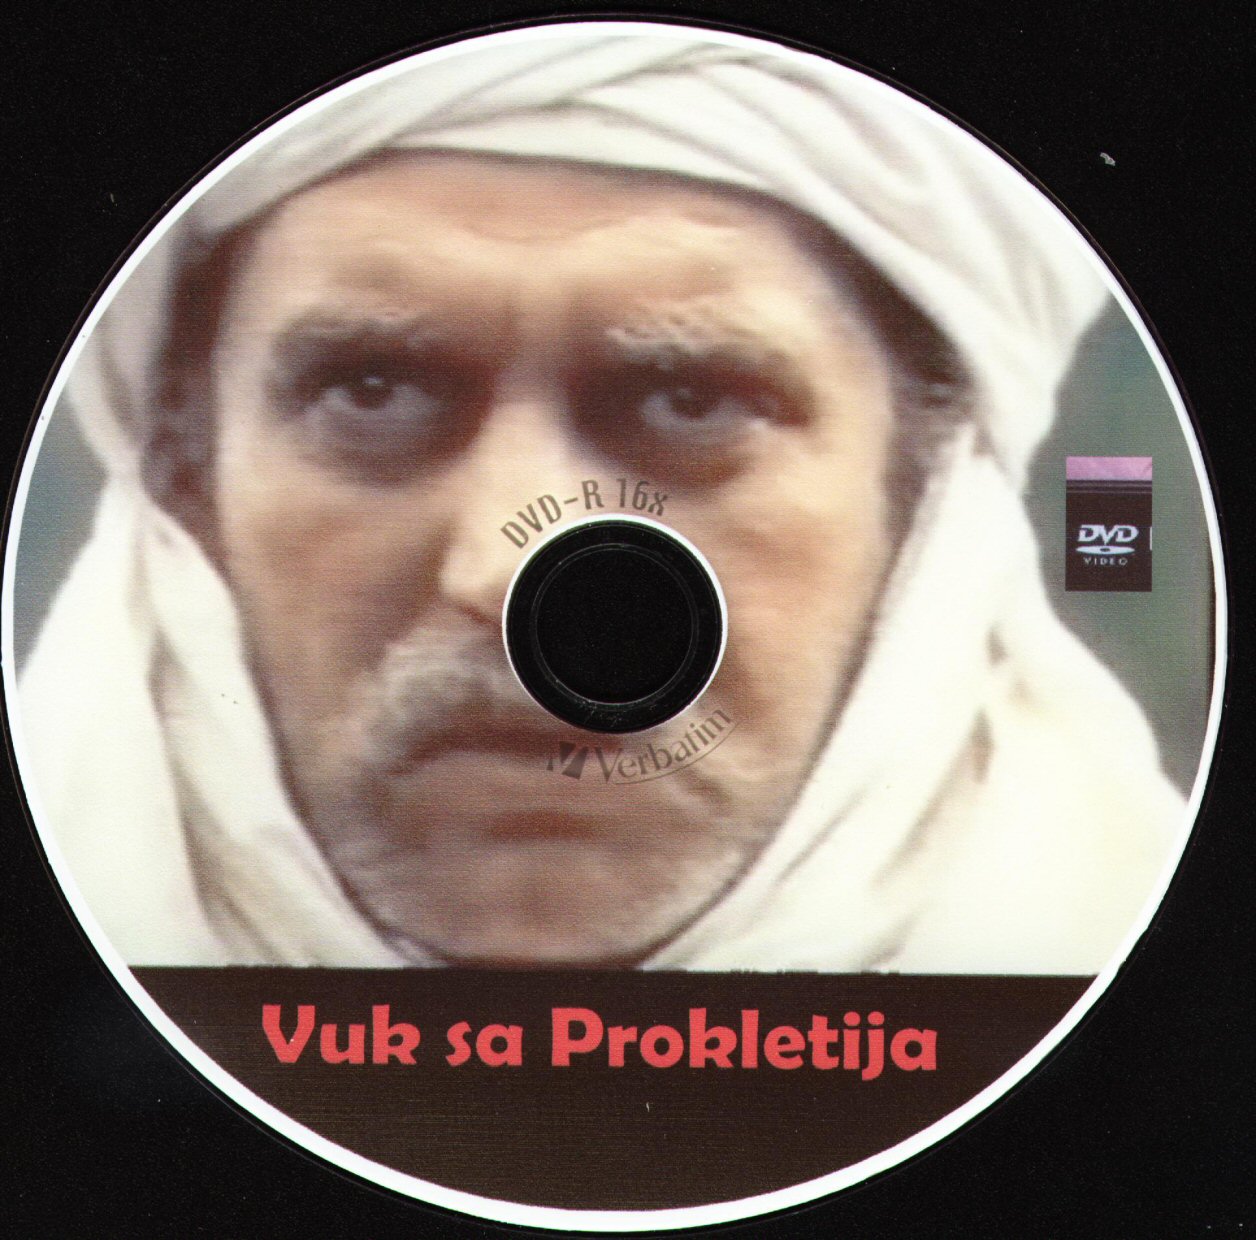 Click to view full size image -  DVD Cover - V - DVD - VUK SA PROKLETIJA - CD - DVD - VUK SA PROKLETIJA - CD.JPG